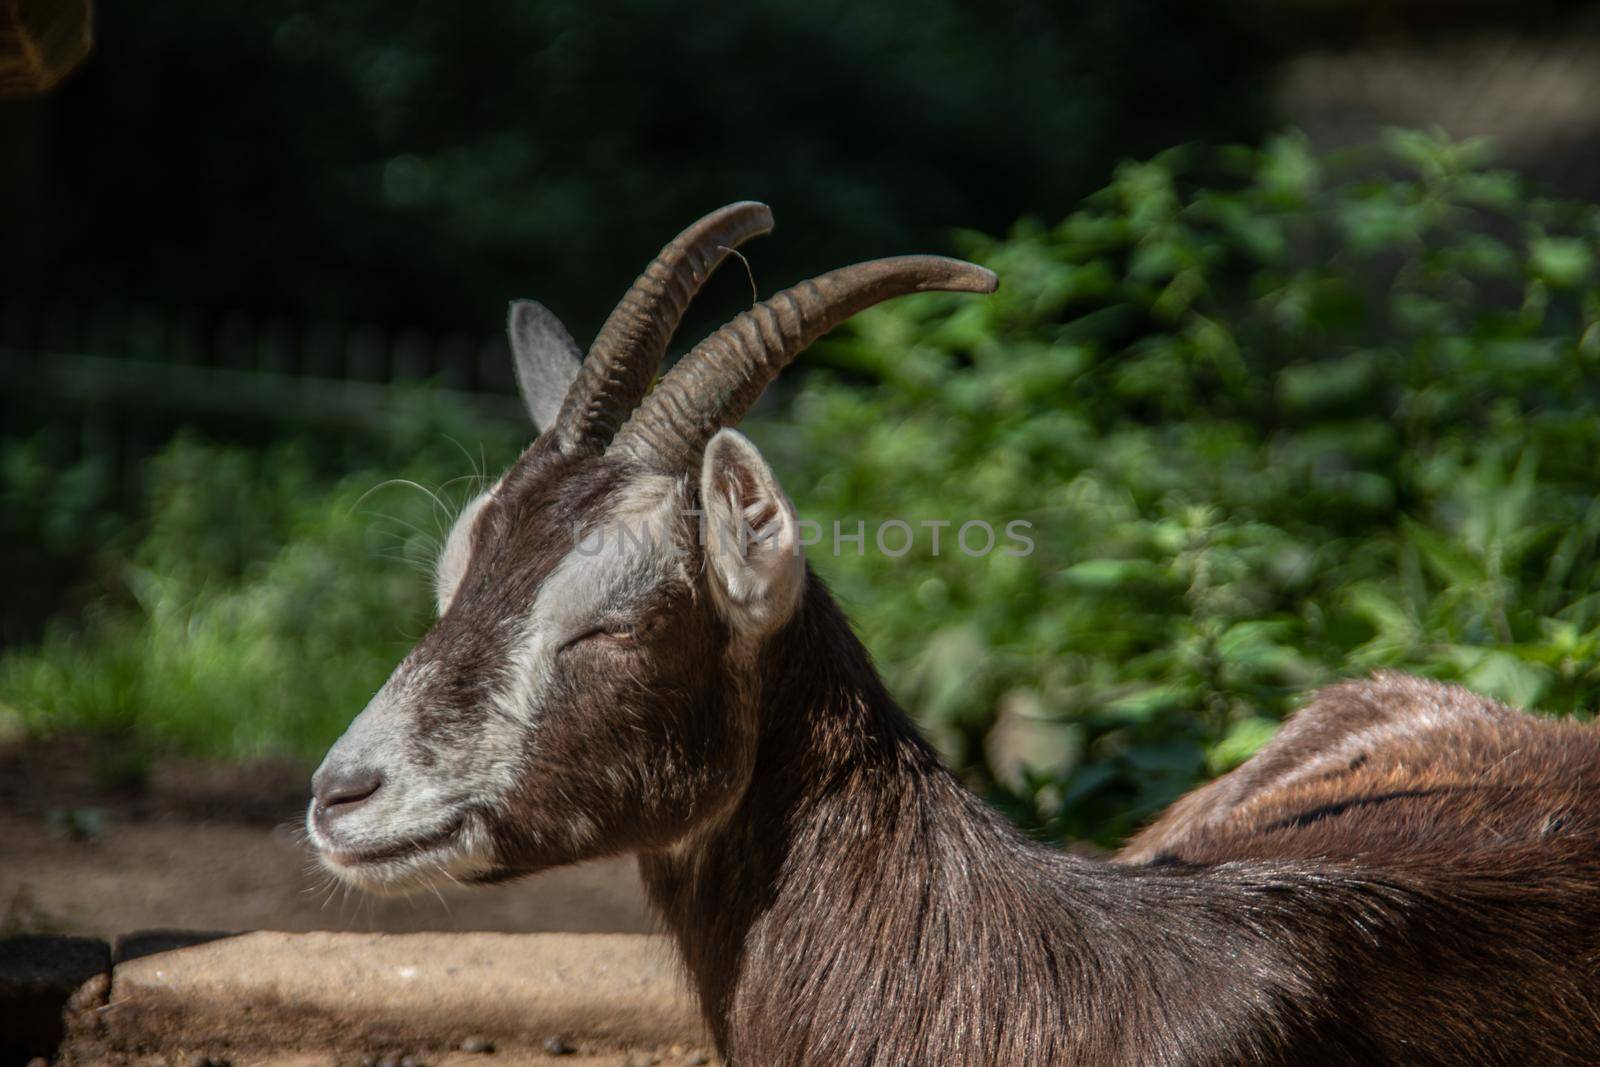 Goat with horns graze on the edge of the forest